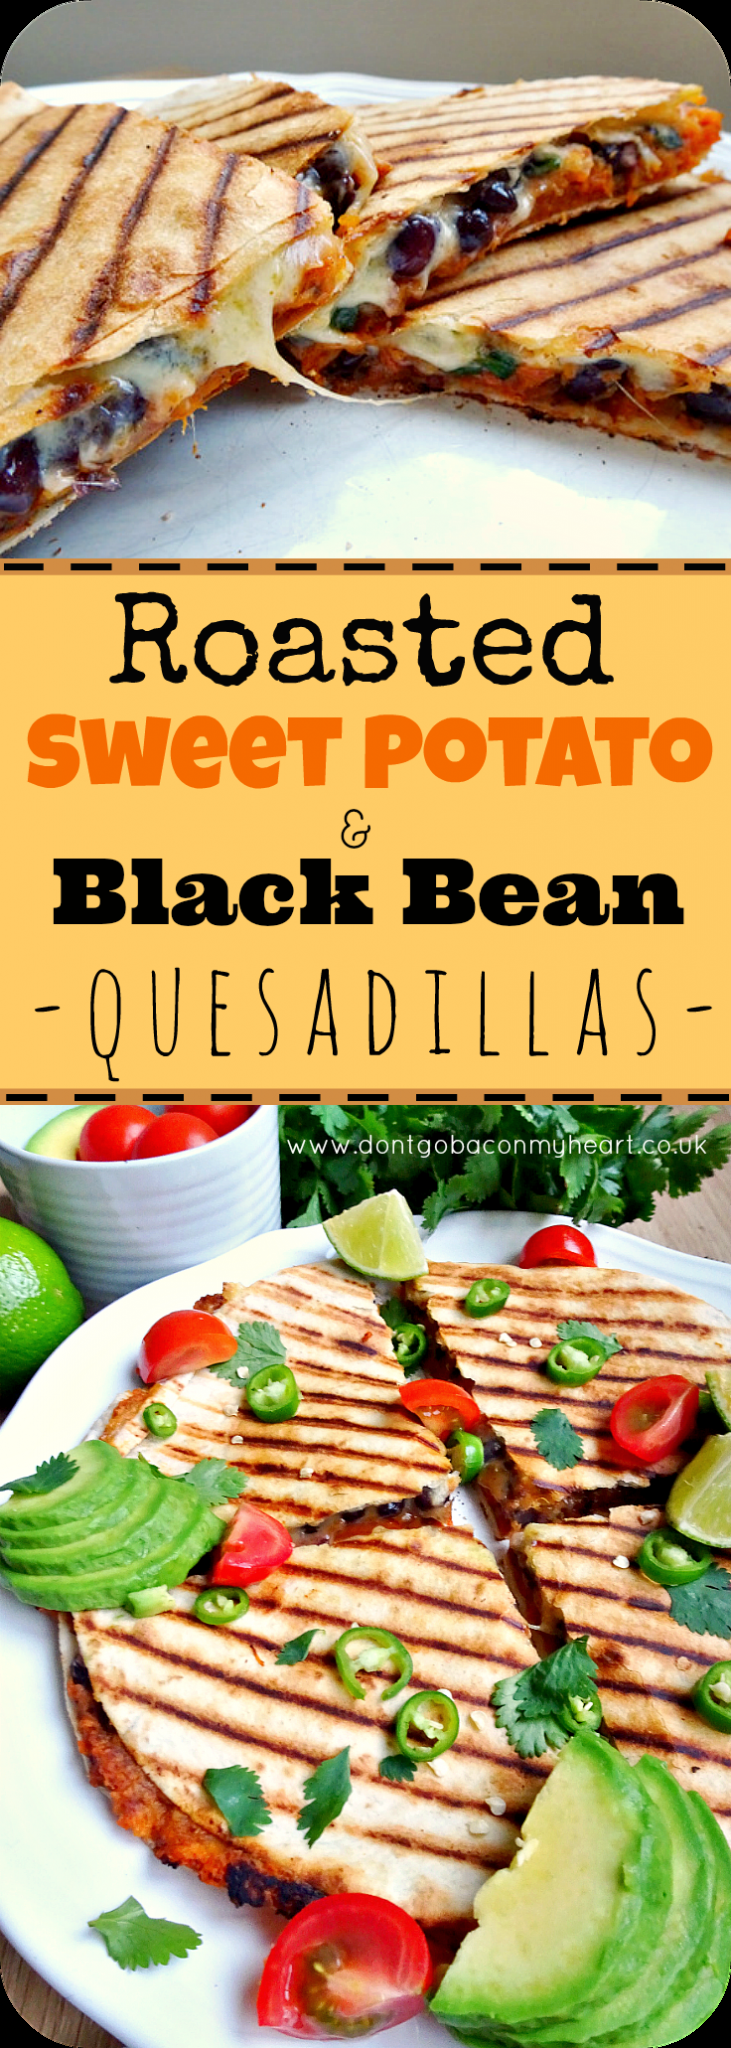 The best vegetarian Quesadillas you’ll ever make. So easy, super quick and most importantly really delicious and filling.